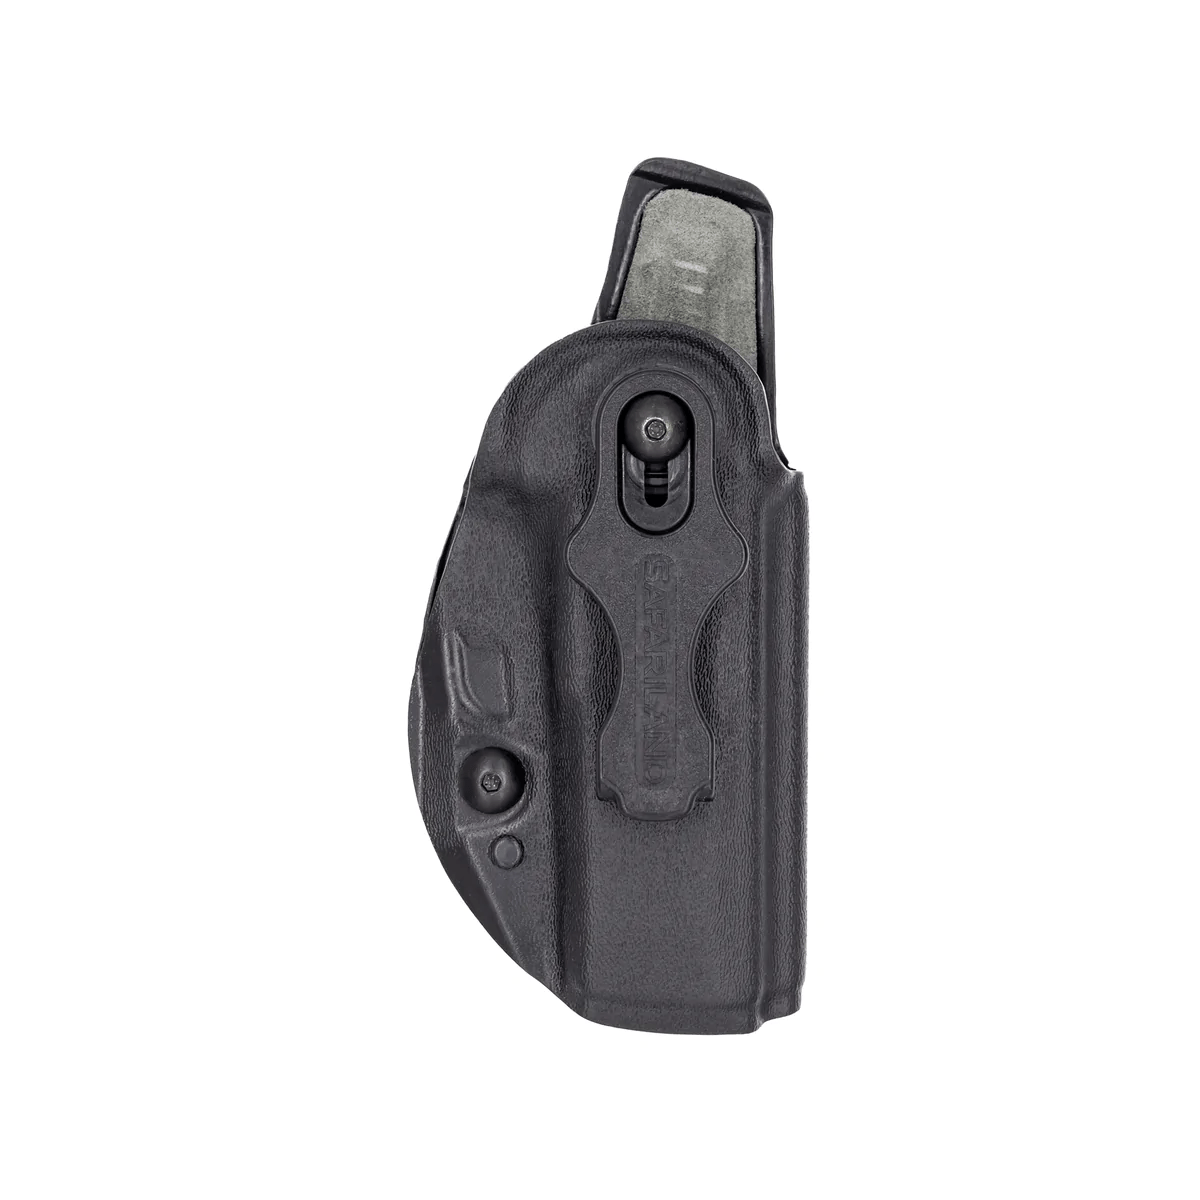 Safariland Species IWB Holster for Smith & Wesson Shield Plus 1332765 - Tactical & Duty Gear